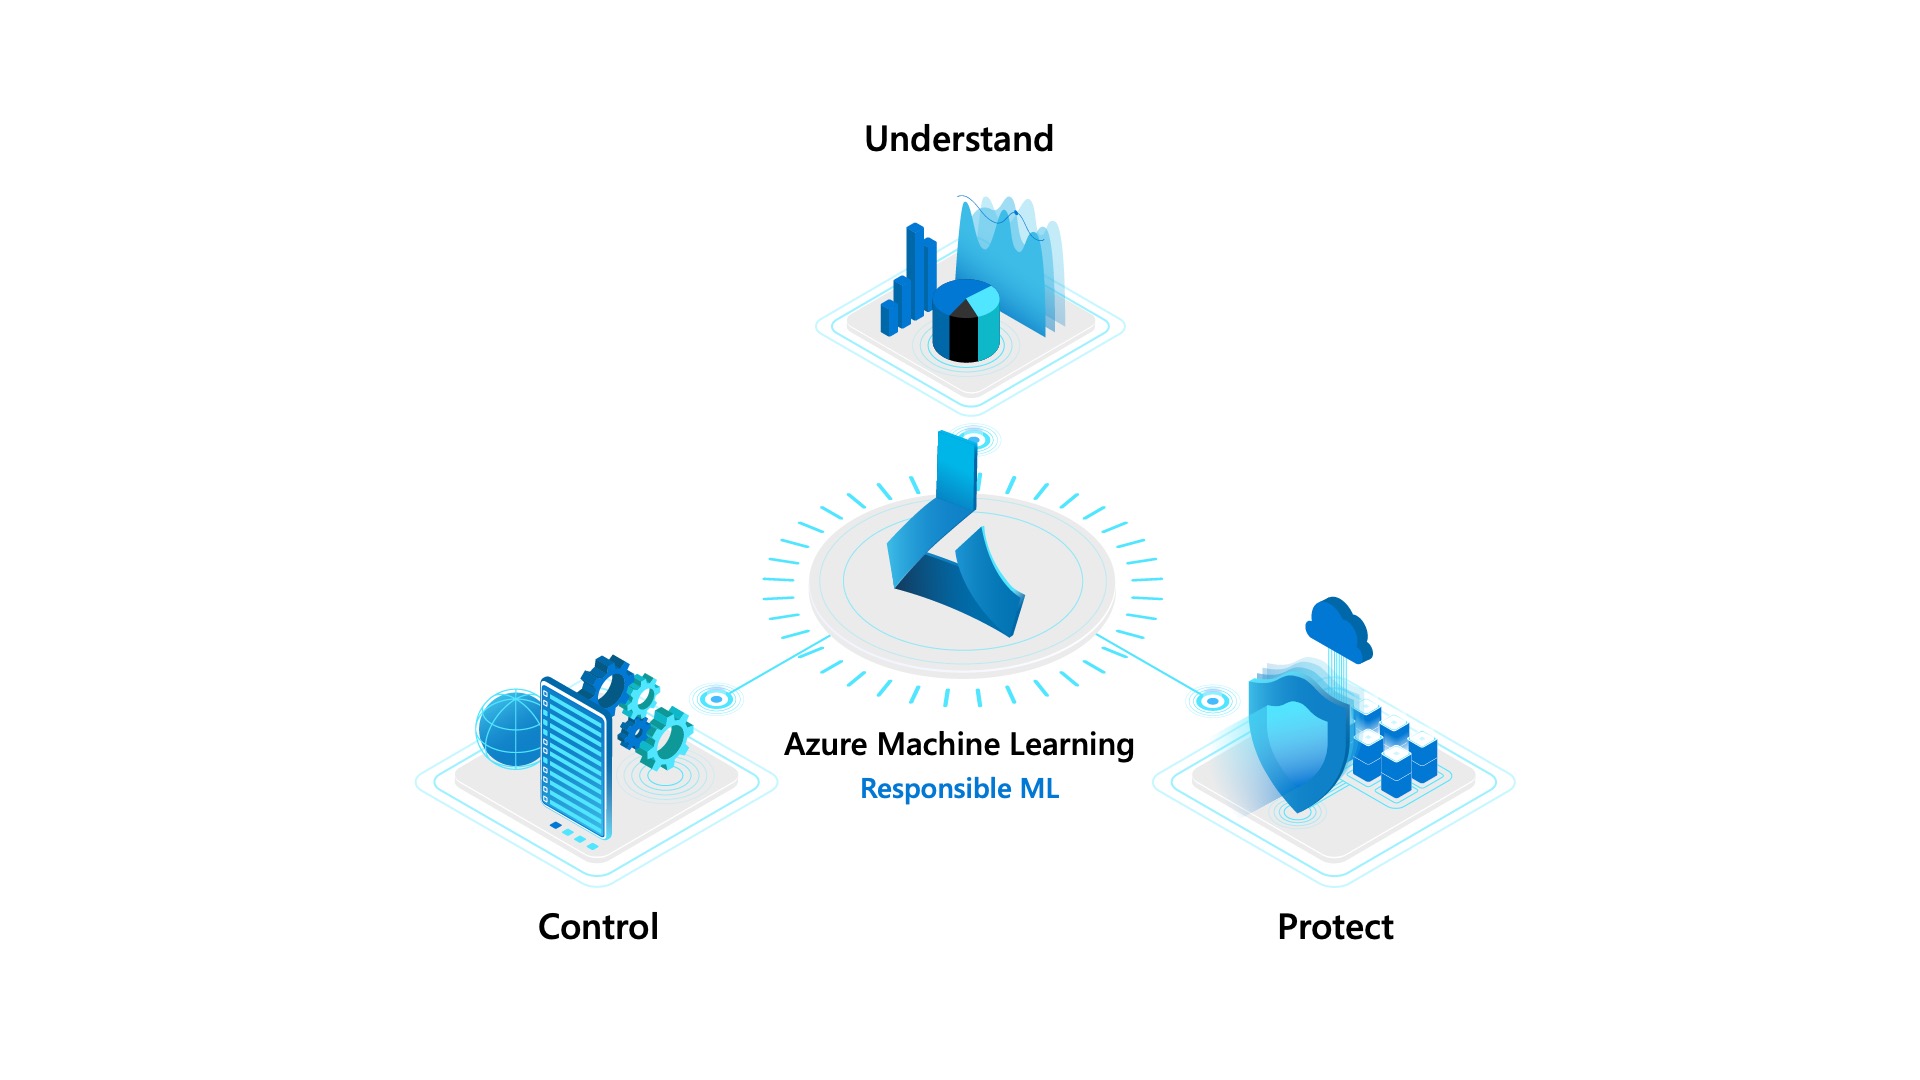 A graphic for Azure Machine Learning, three sections for Understand, Control, and Protect